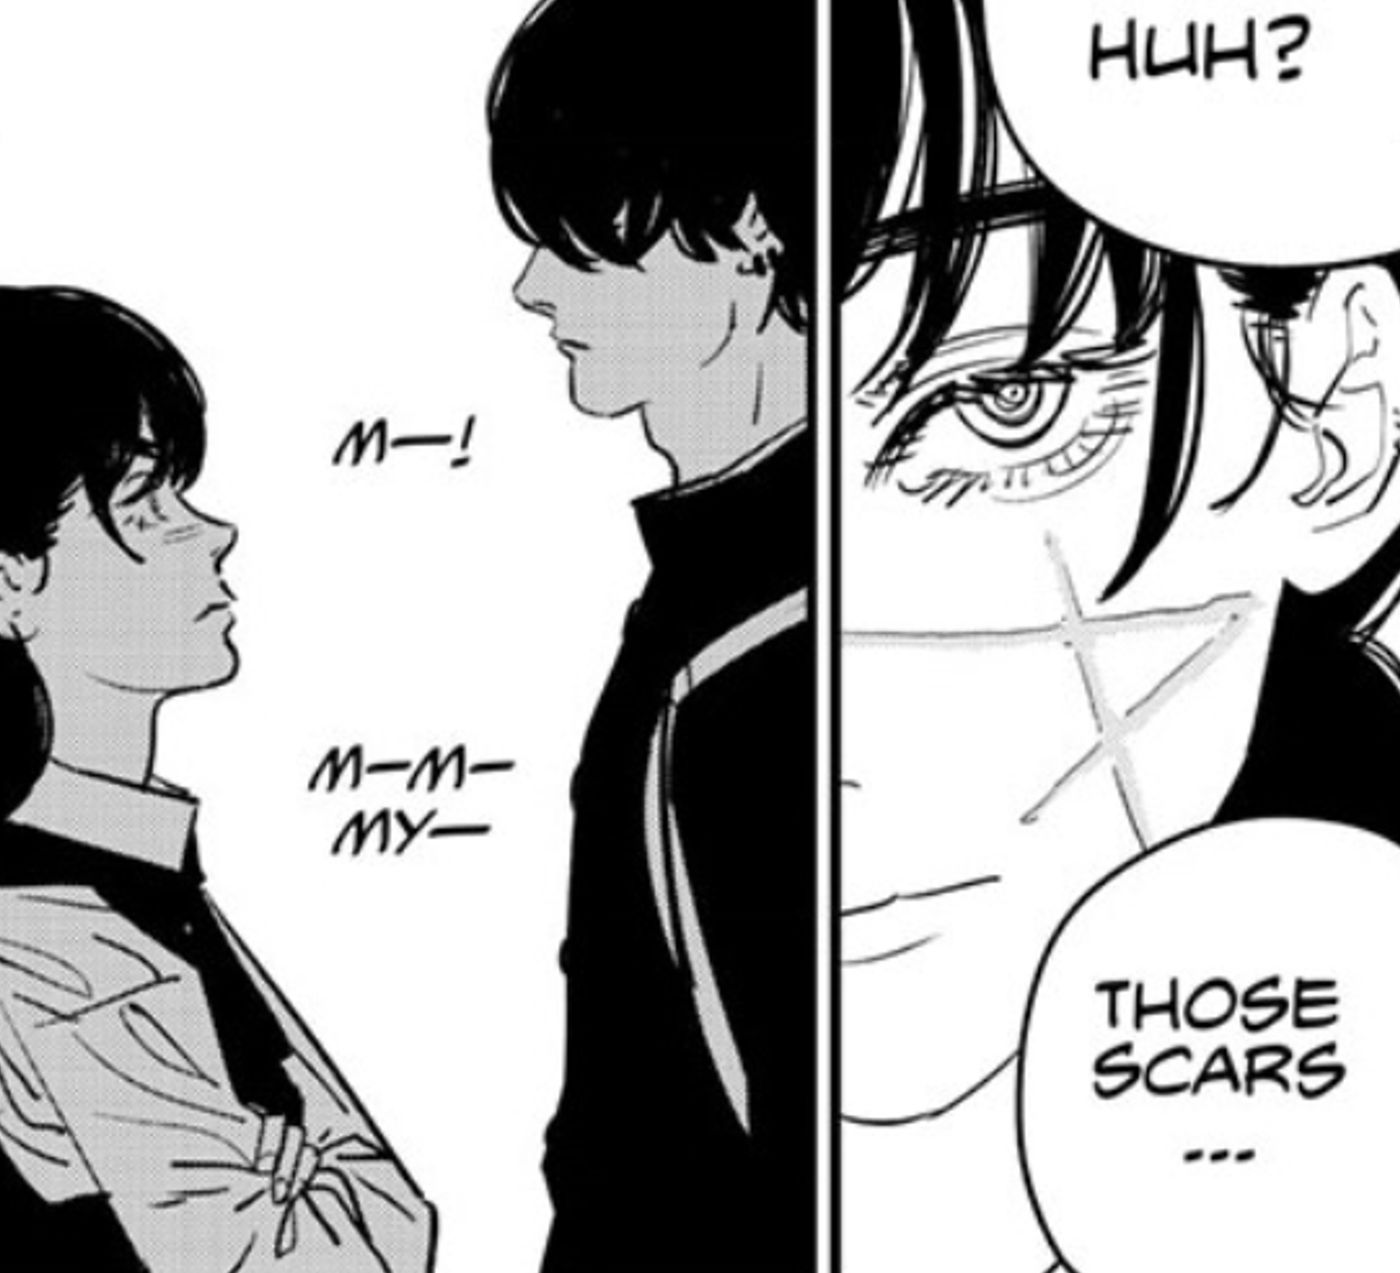 Yoshida notices the scars that suddenly appear on Asa Mikatas face when the War Devil takes over her body in Chainsaw Man chapter 99